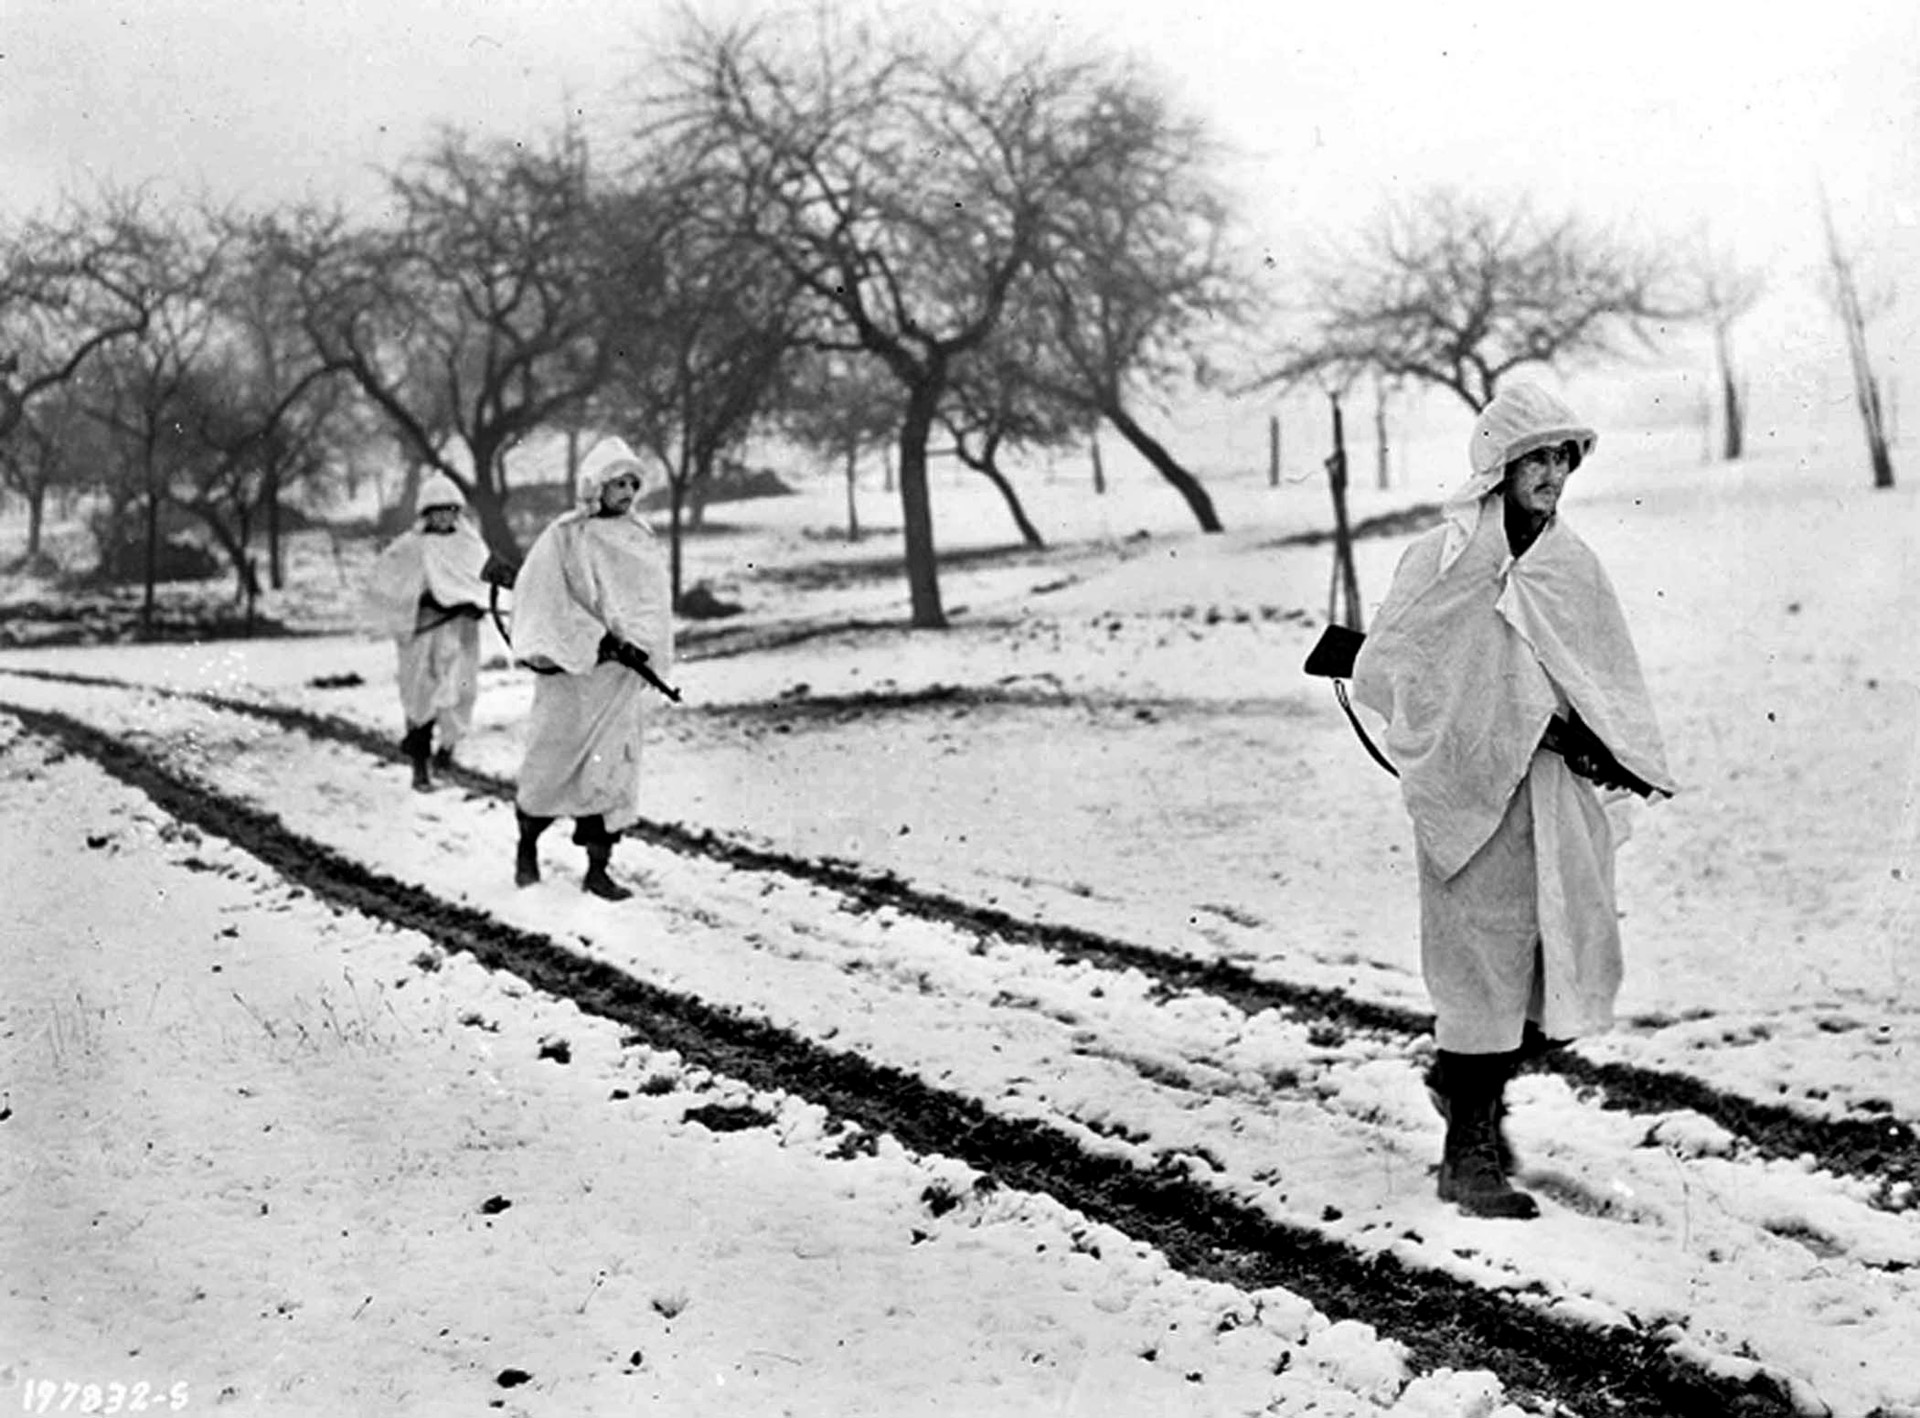 Covered with white sheets to help them blend in with the snow, an American patrol sets out during the Battle of the Bulge. Tom Myers recalls encountering German soldiers wearing American uniforms during one such patrol.